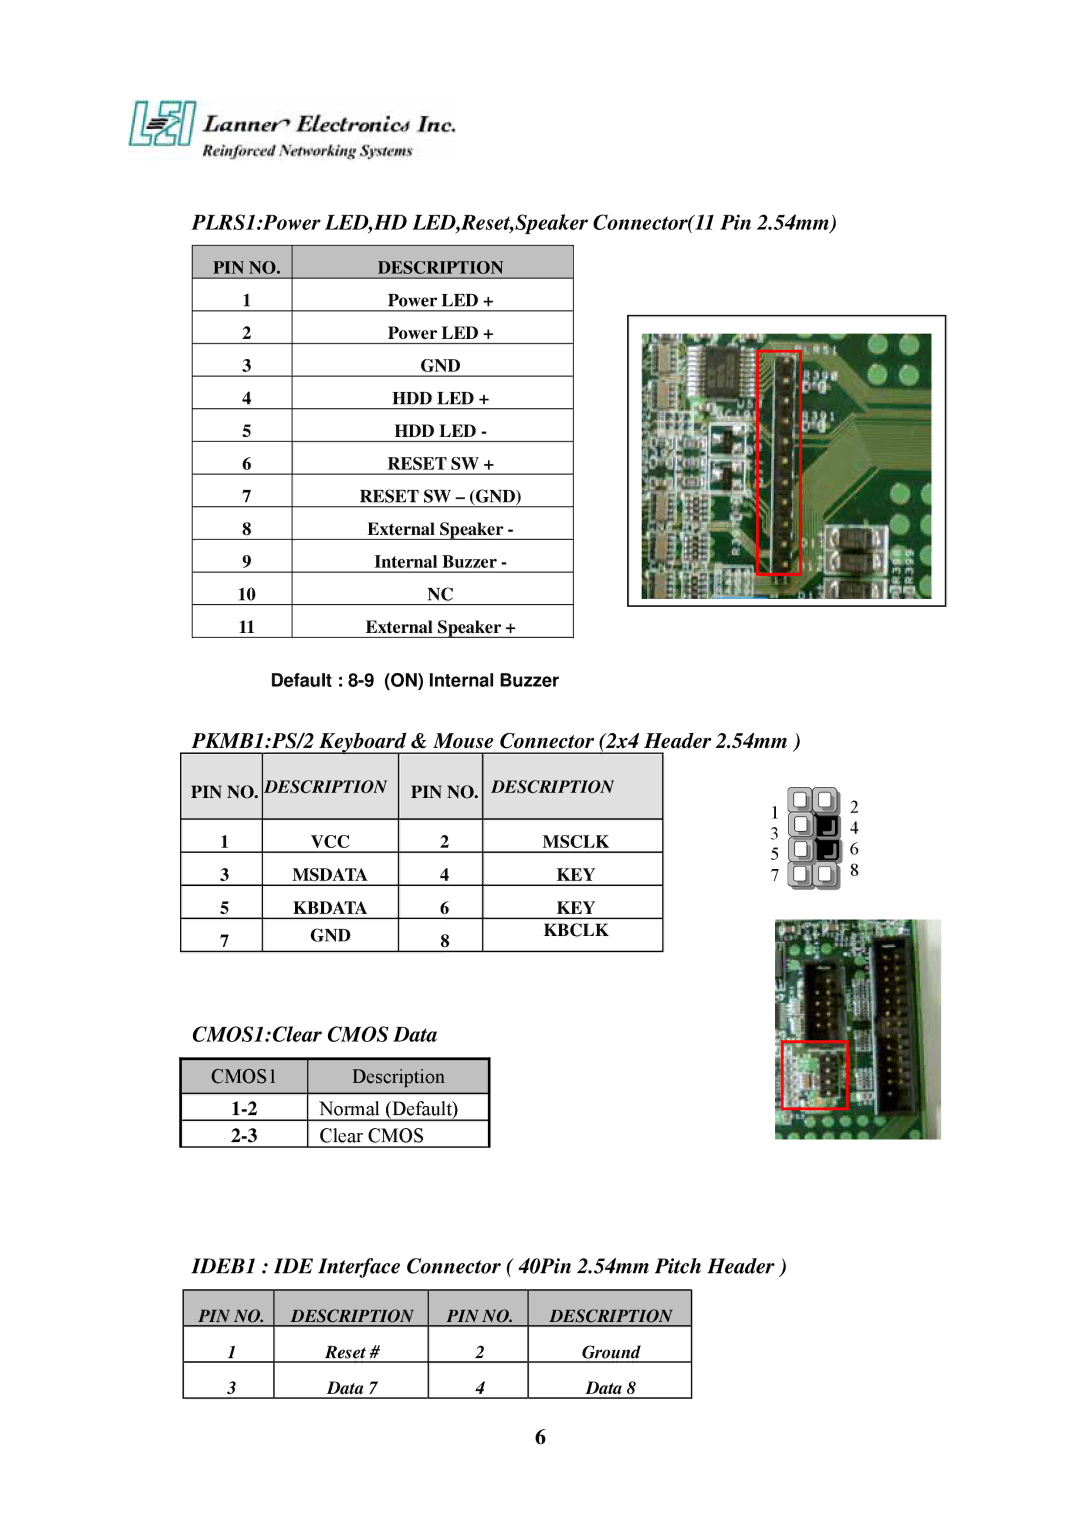 Lanner electronic FW-7890 user manual PKMB1PS/2 Keyboard & Mouse Connector 2x4 Header 2.54mm 